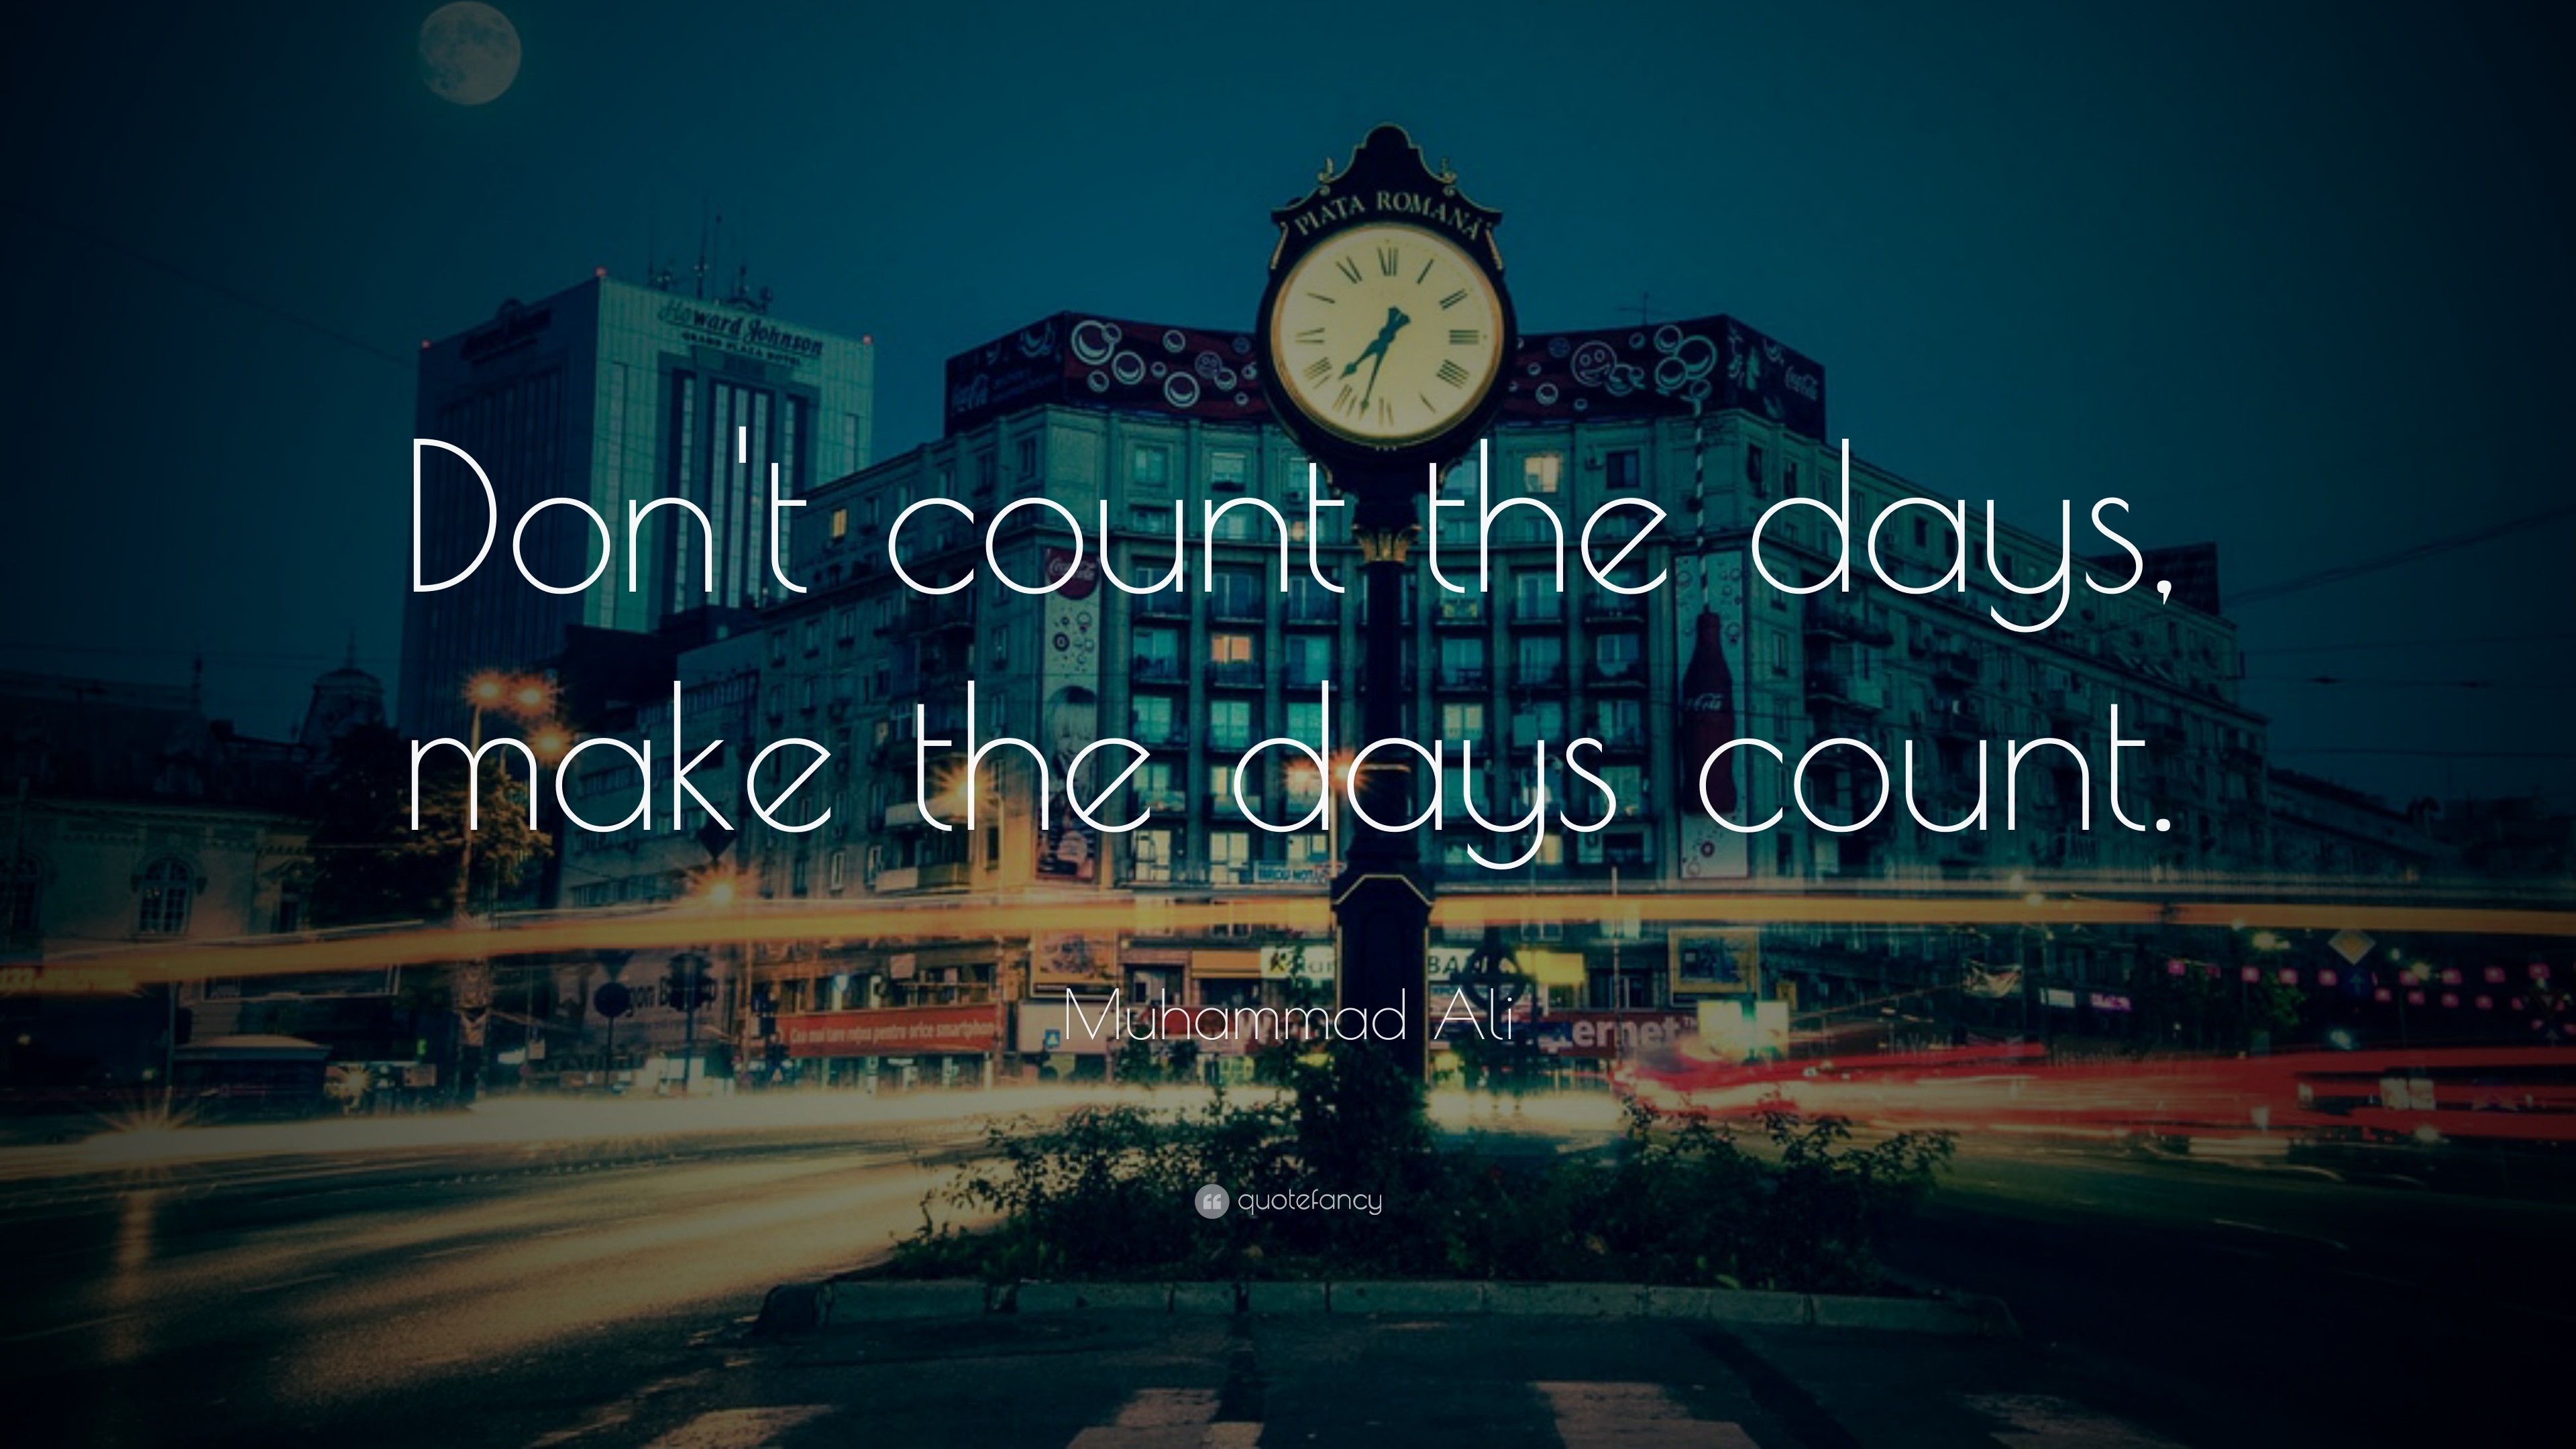 3840x2160 Muhammad Ali Quote: “Don't count the days, make the days count